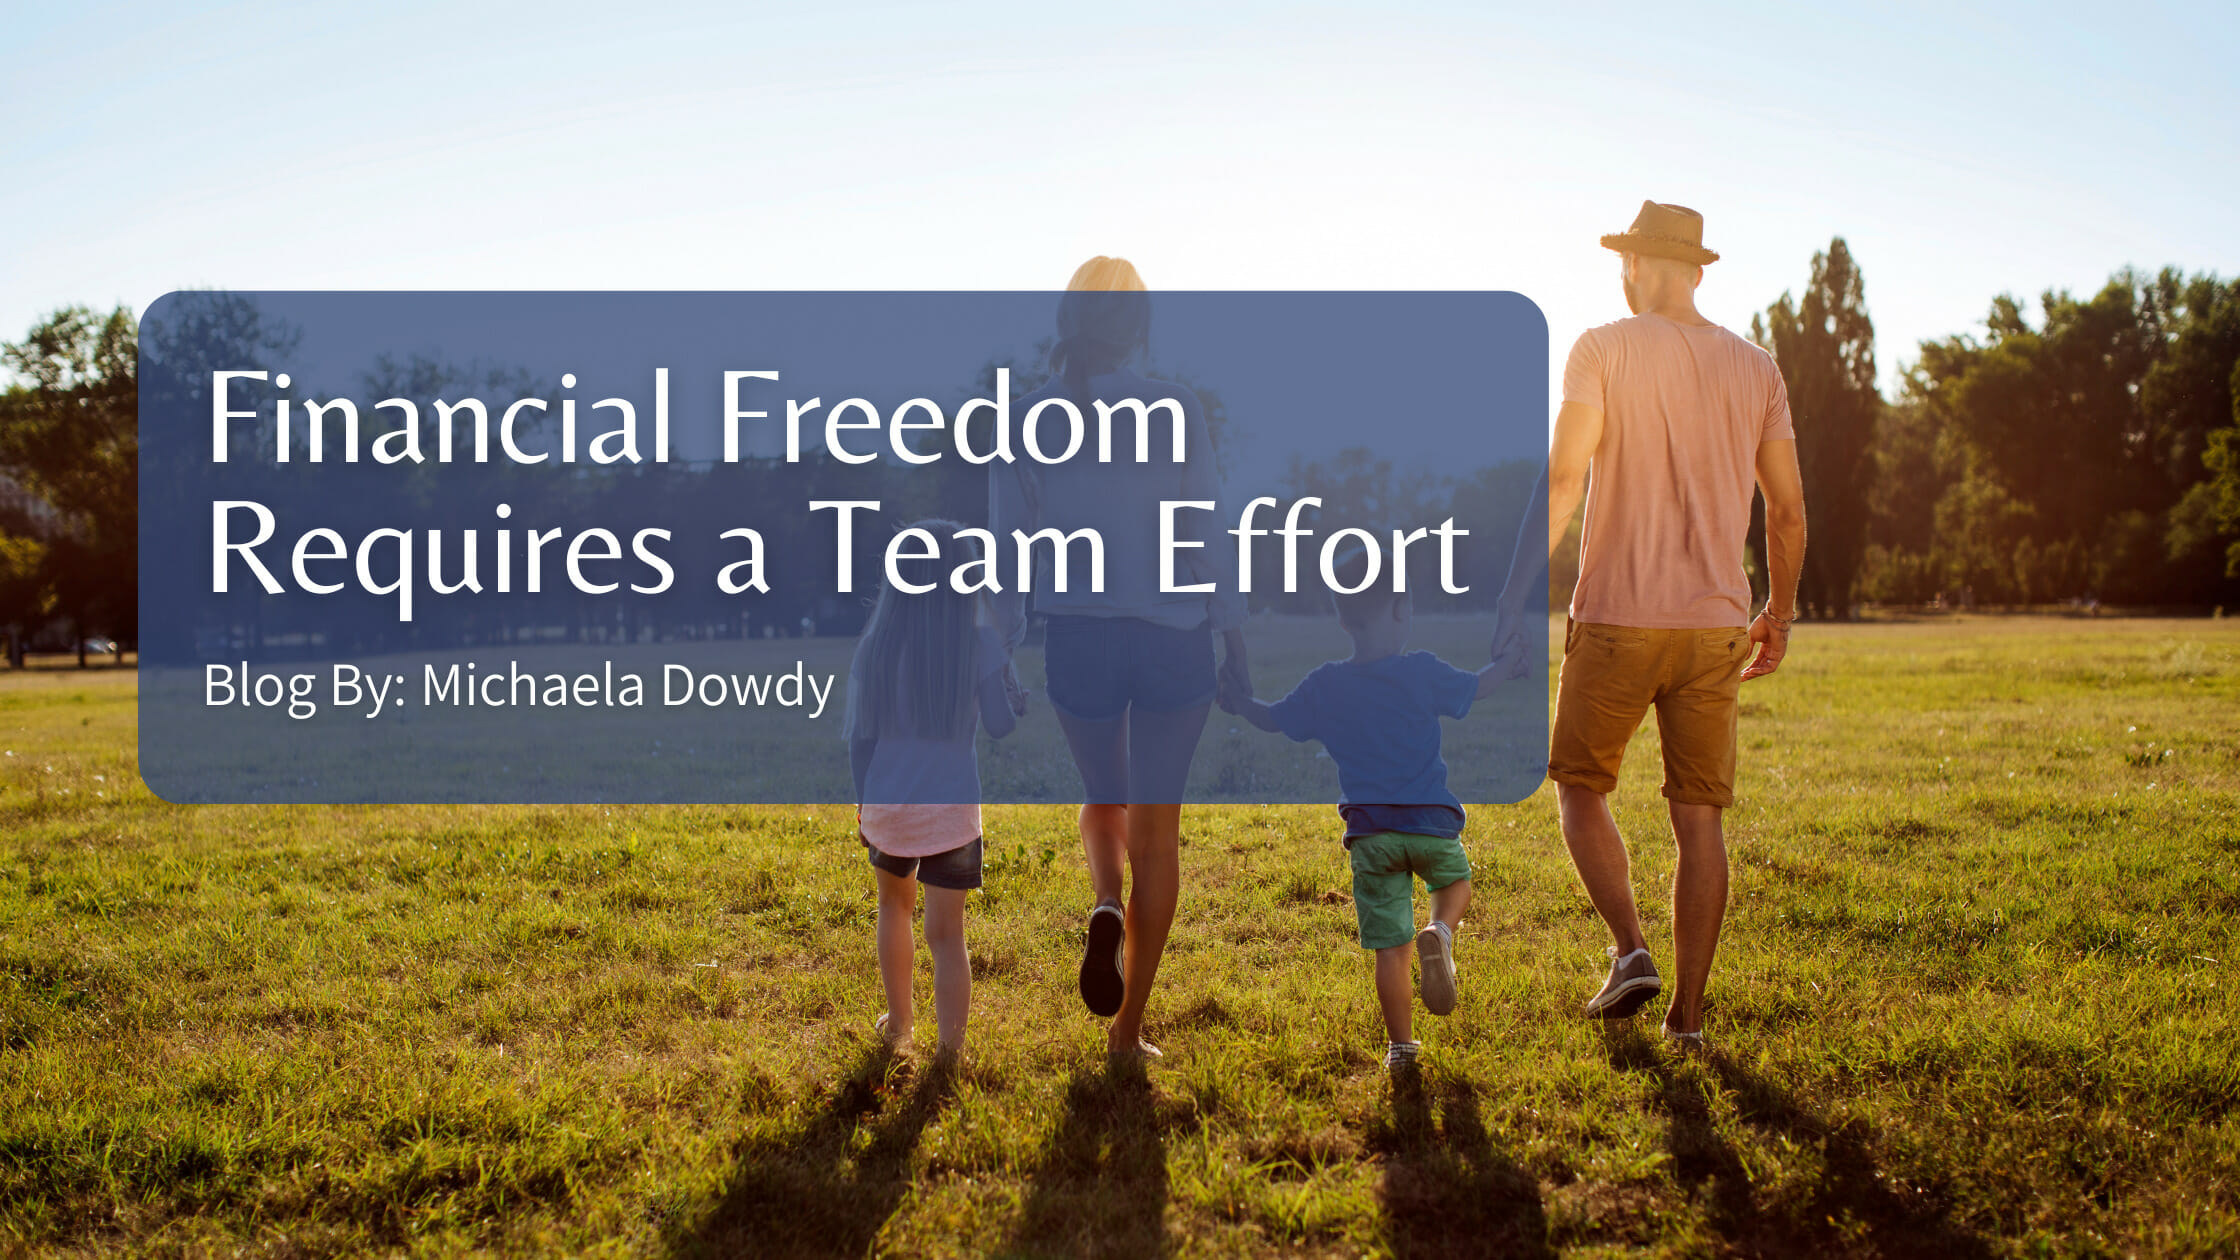 Financial Freedom Requires a Team Effort